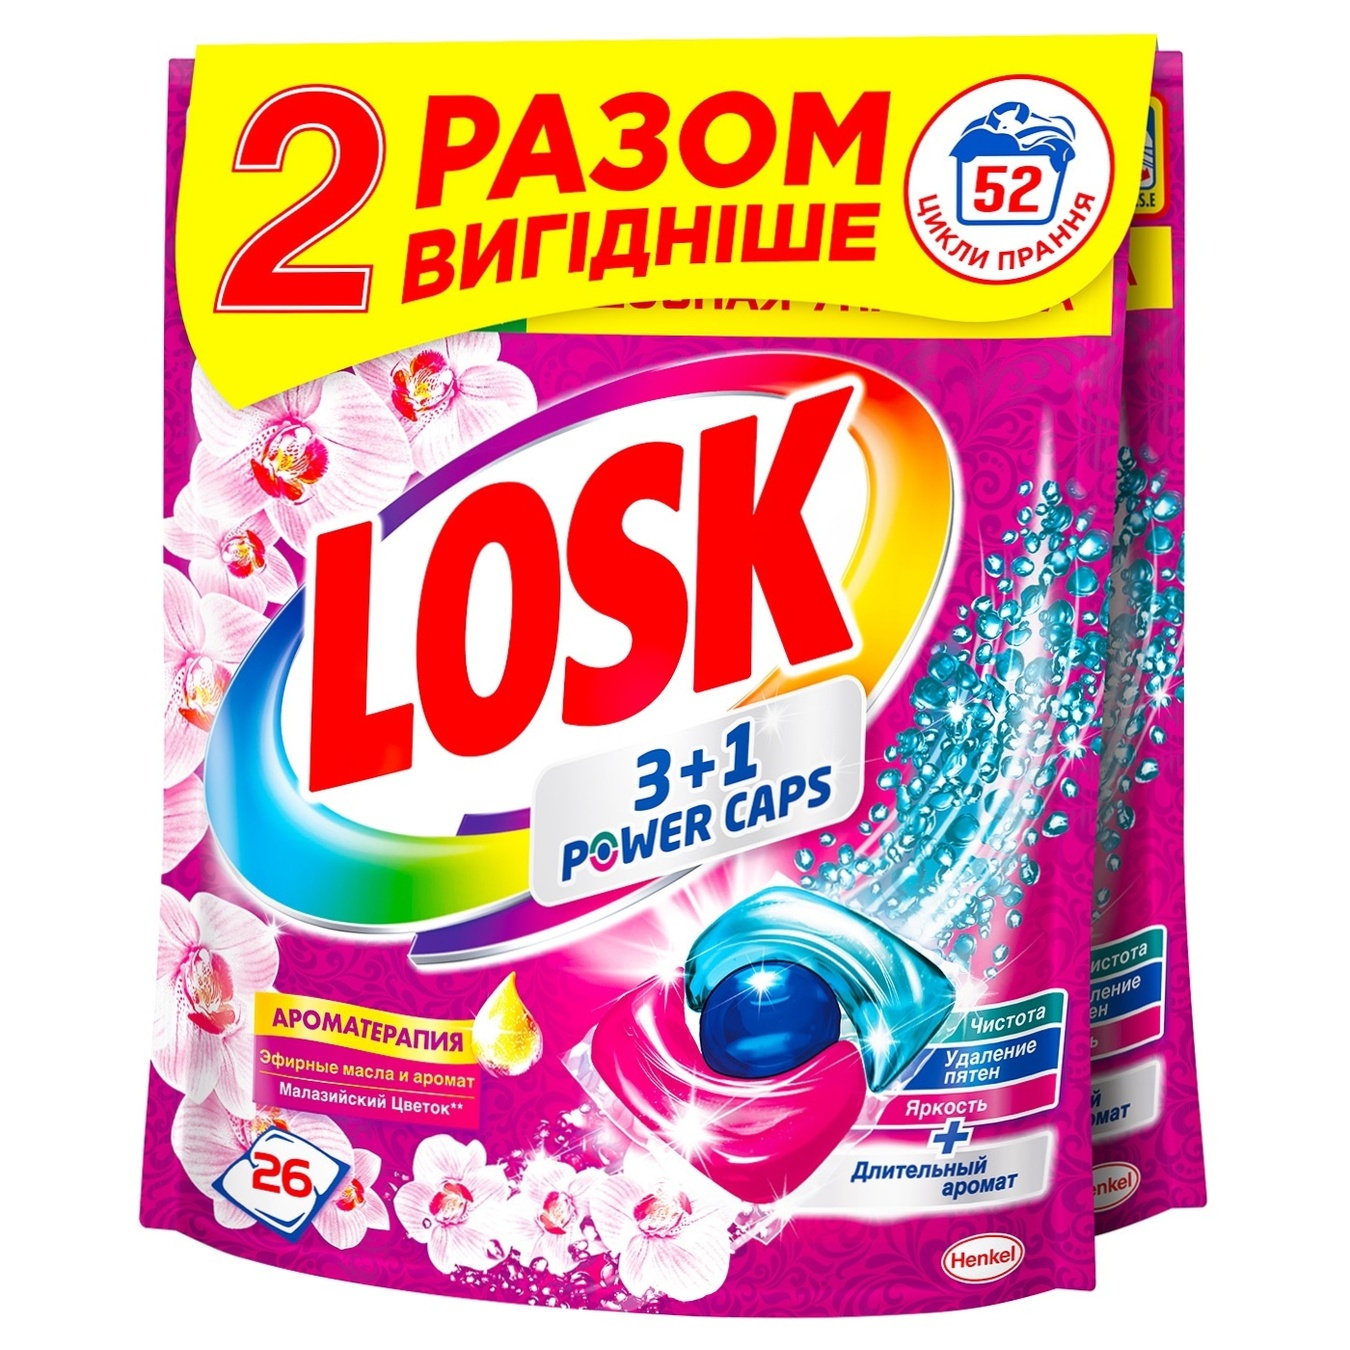 Capsules for washing Losk trio JSC Essential oils and fragrance Malaysian flower 26pcs